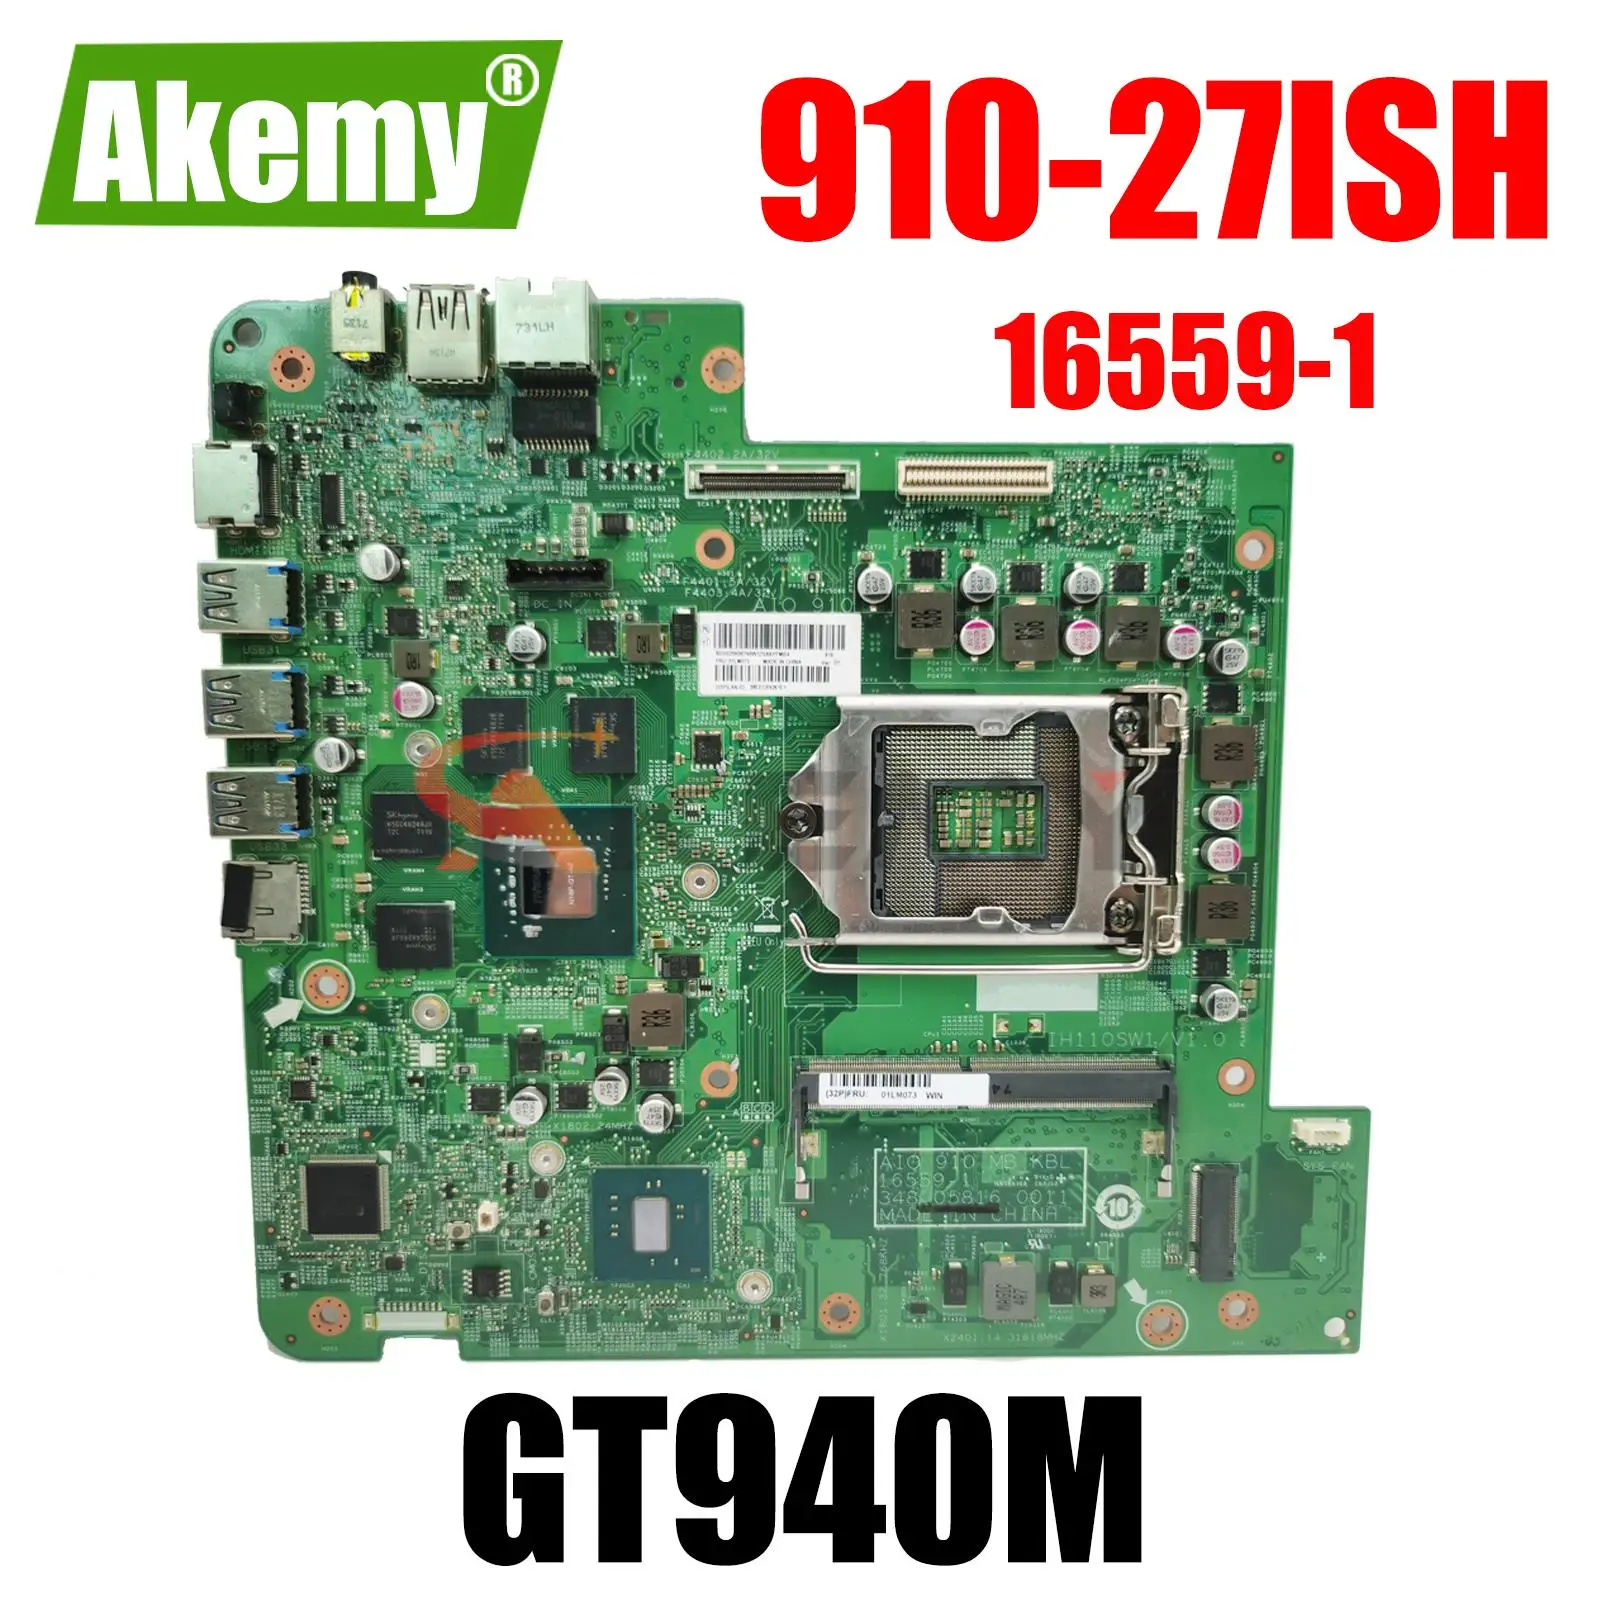 

IH110SW1/V1.0 00UW156 mainboard for Lenovo IdeaCentre AIO 910-27ISH Motherboard 16559-1 15083-1 mainboard GT940M fully tested